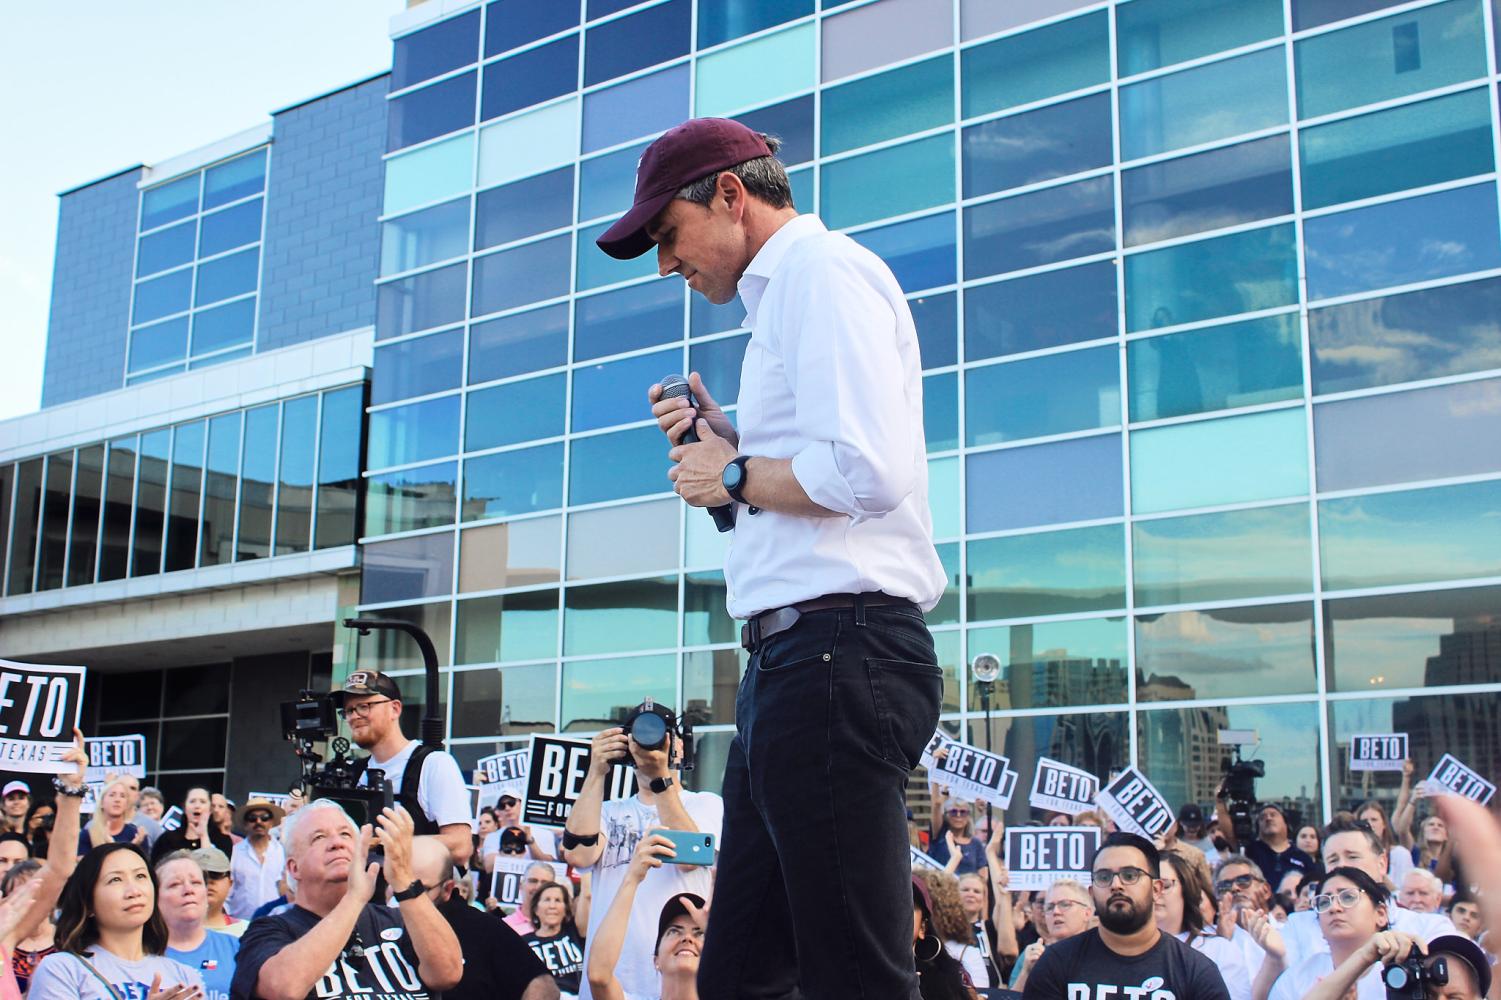 Beto hosts rally downtown to promote Texas Governor campaign hq photo